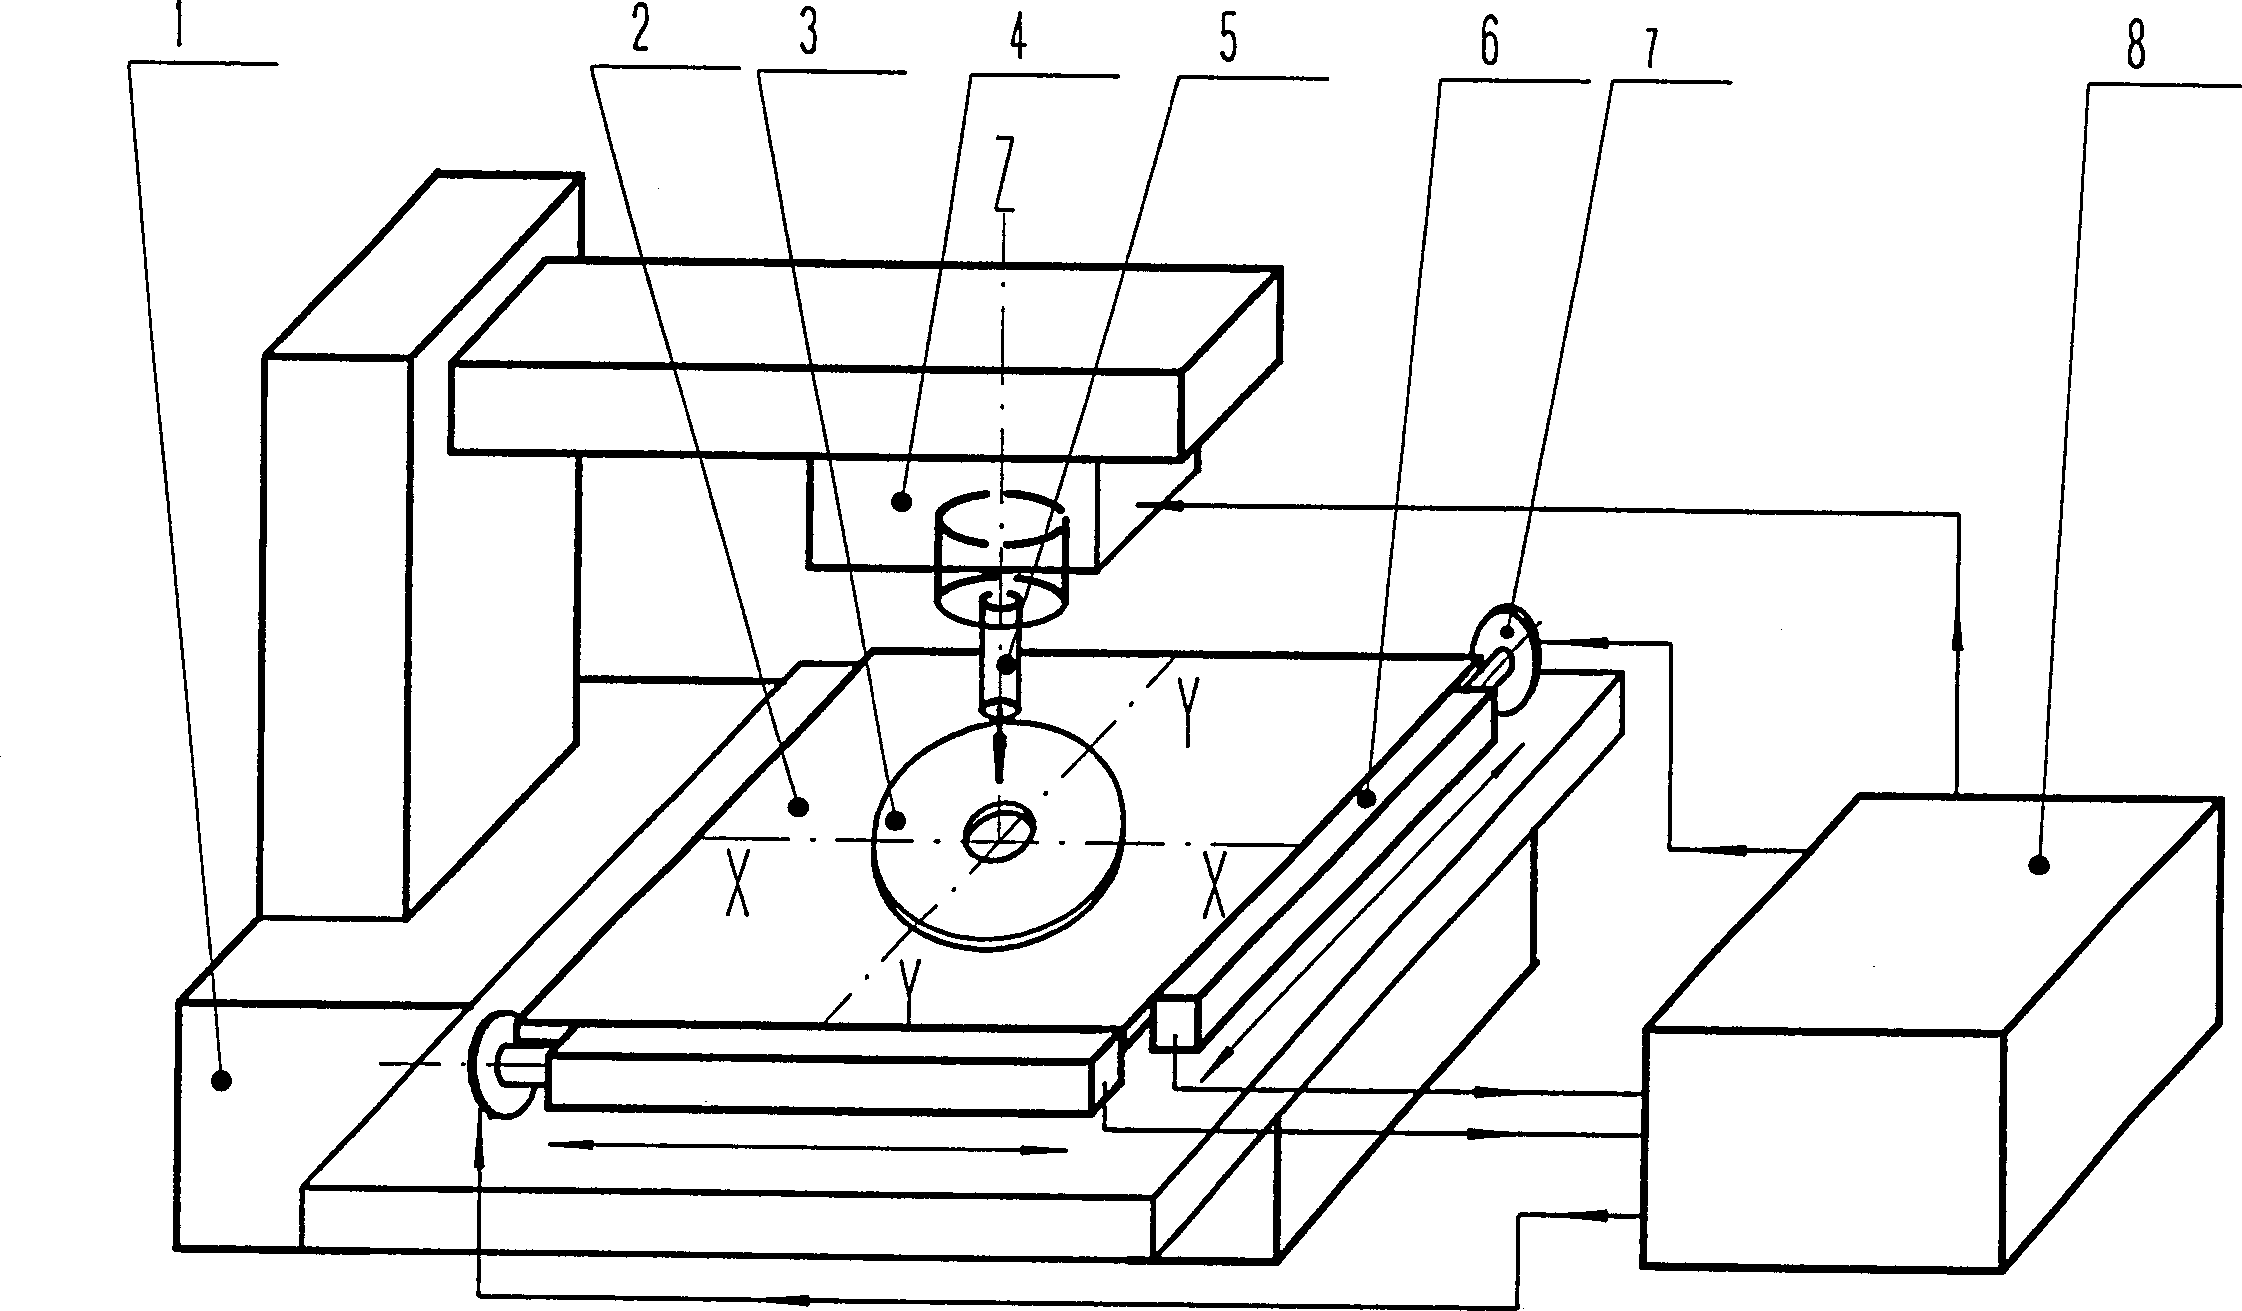 Method for forming gratings by laser direct writing device